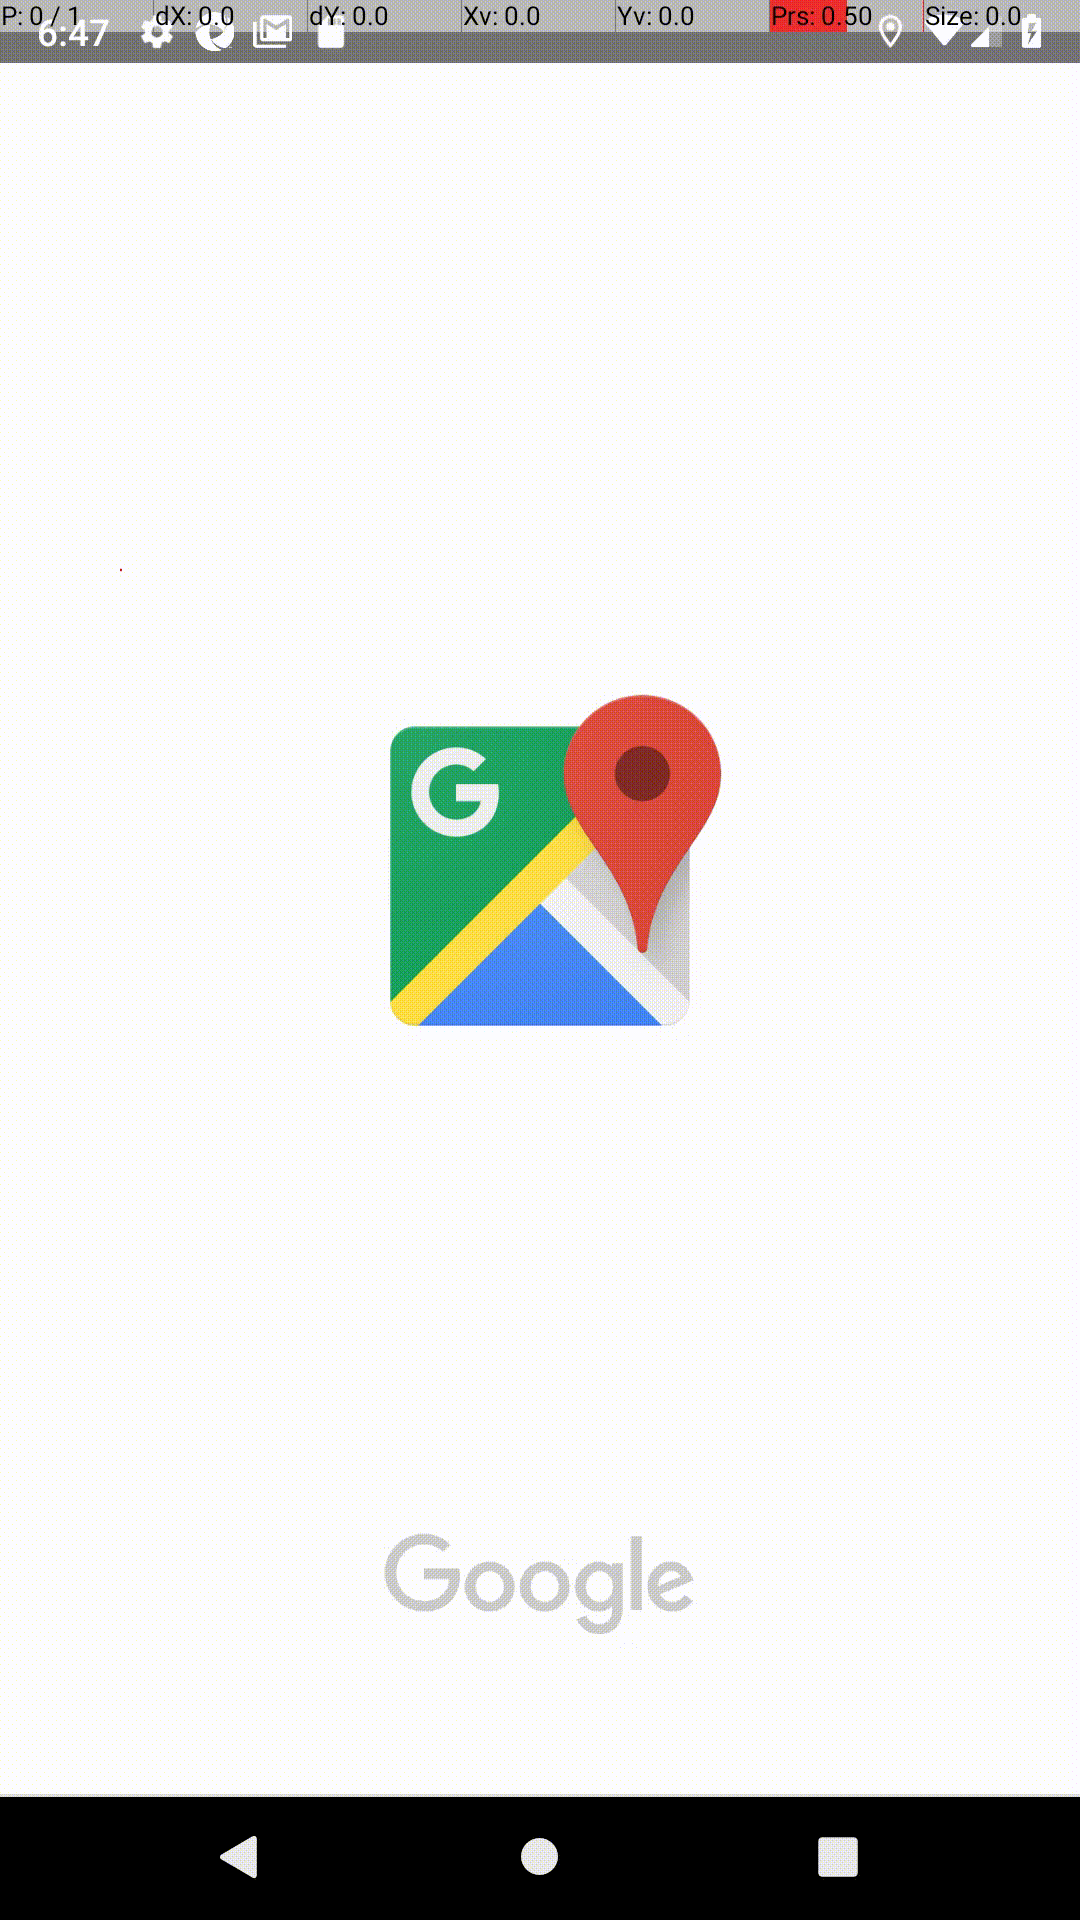 Pinch gestures successfully zooming in and out on Google Maps